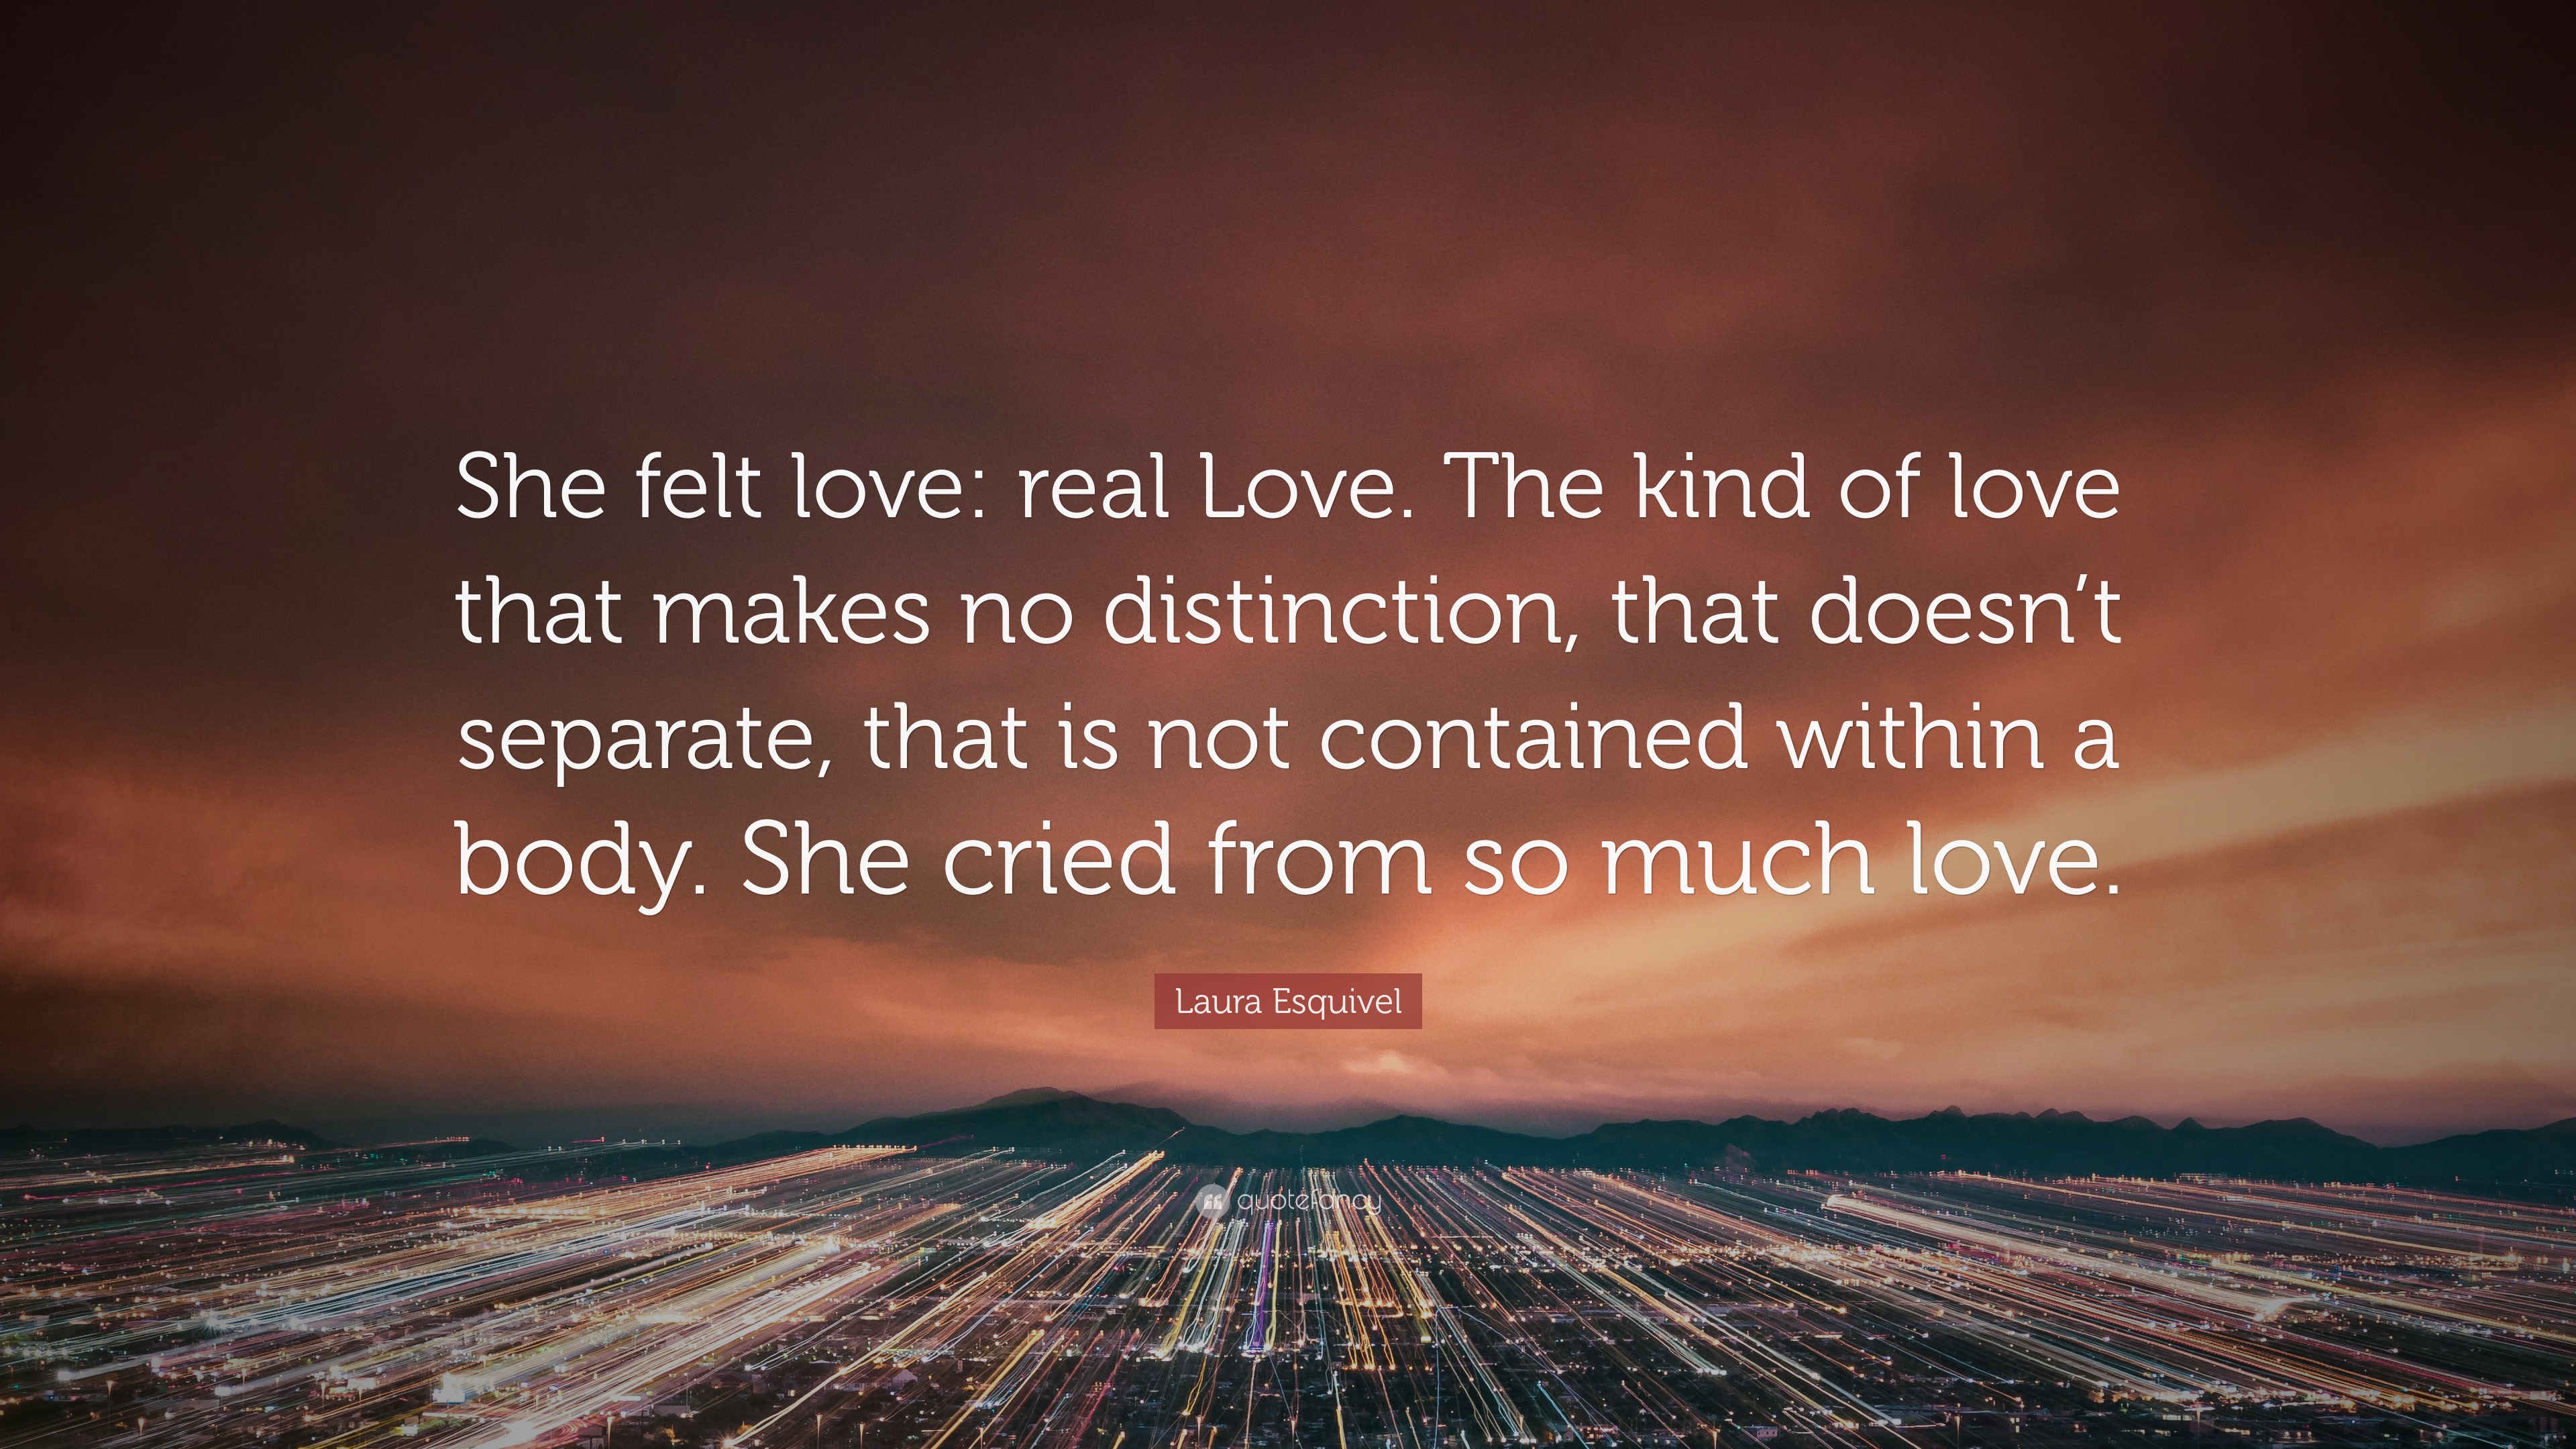 Laura Esquivel Quote: “She felt love: real Love. The kind of love that  makes no distinction, that doesn't separate, that is not contained withi”